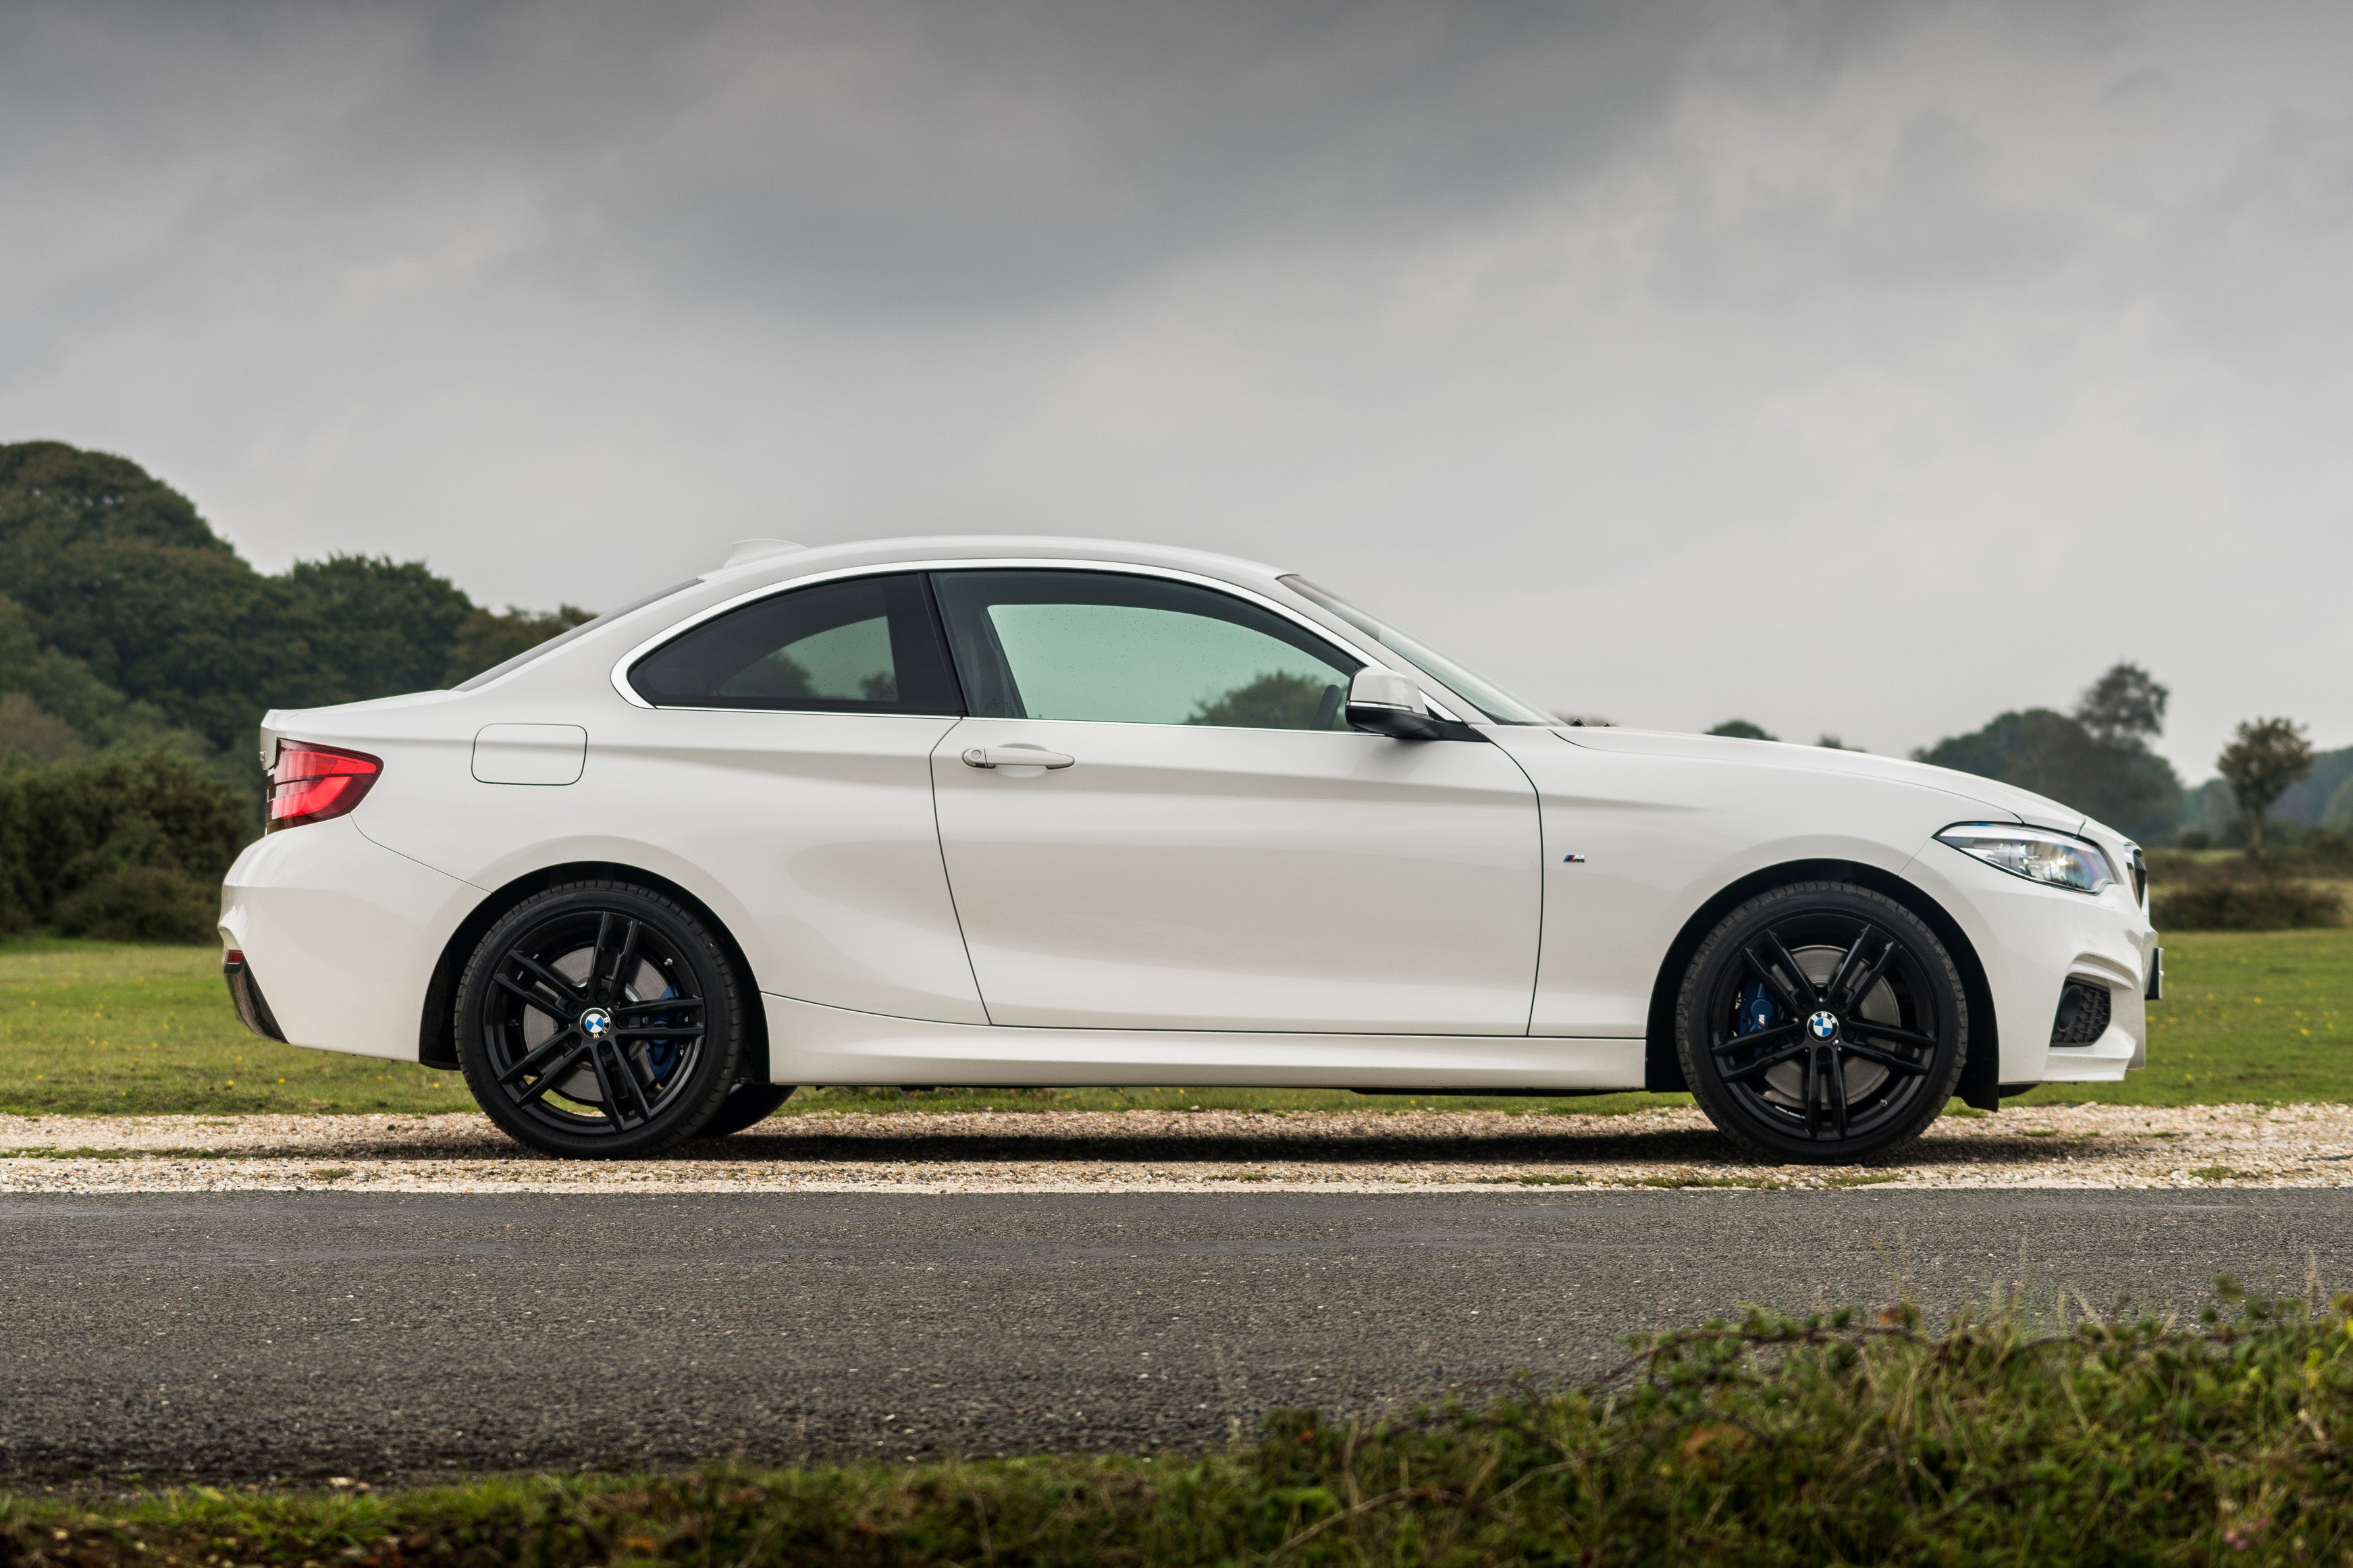 Used BMW 2 Series (2014-2021) Review